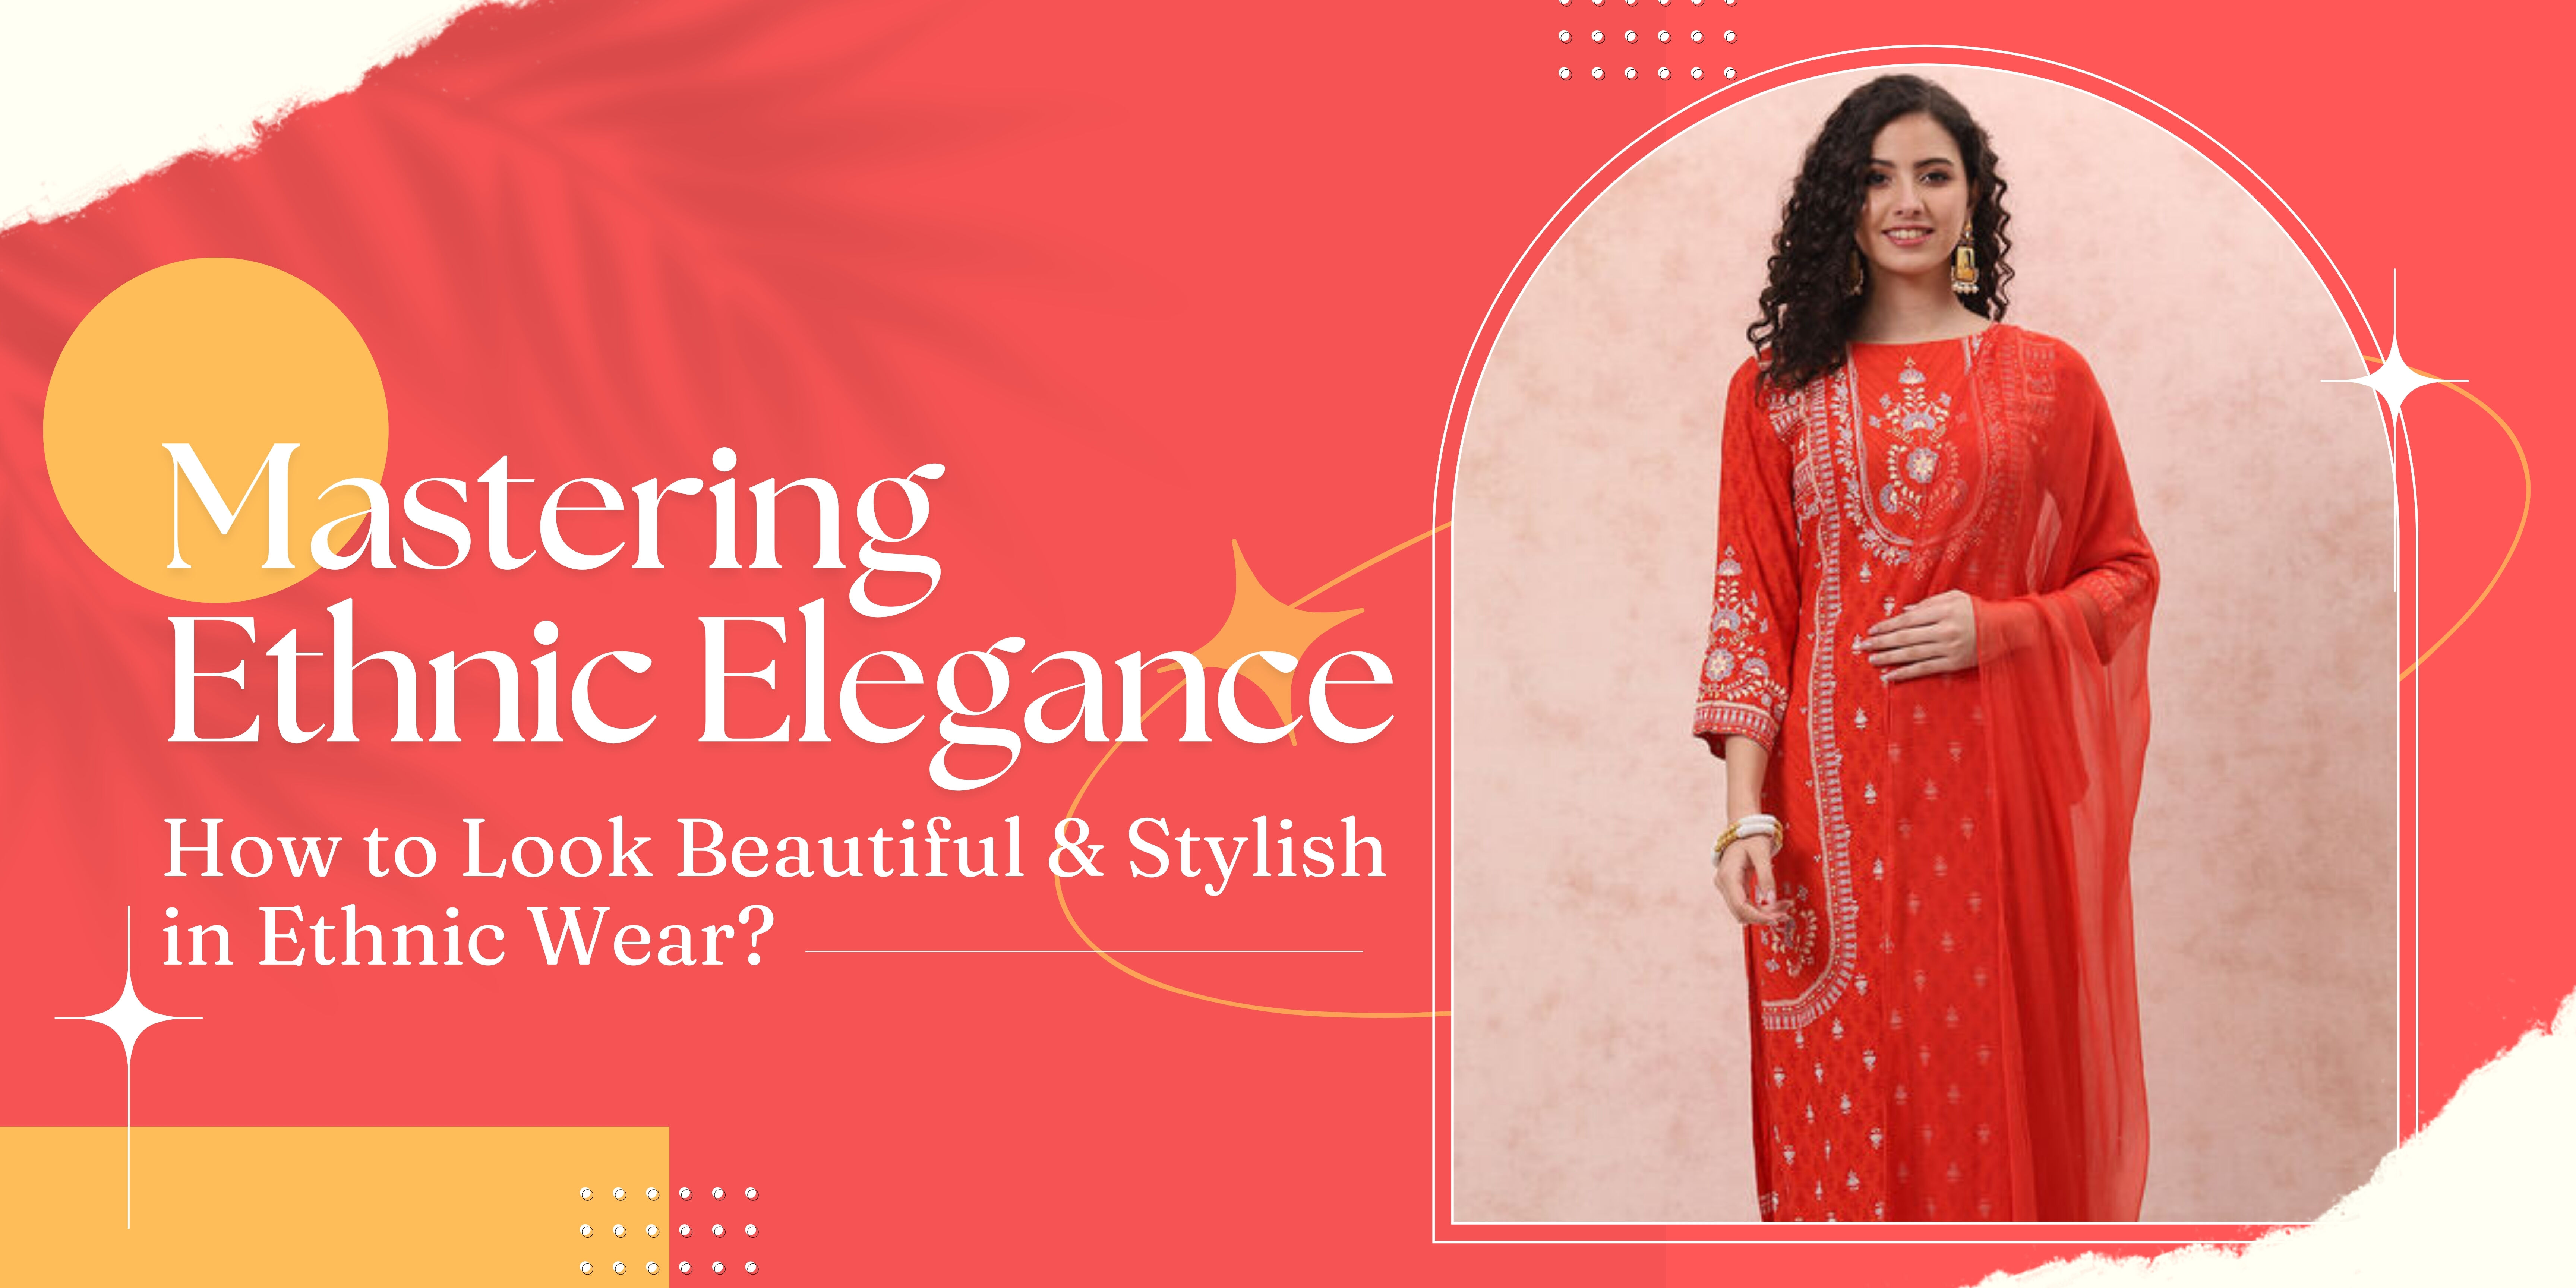 How to Look Beautiful and Stylish in Ethnic Wear